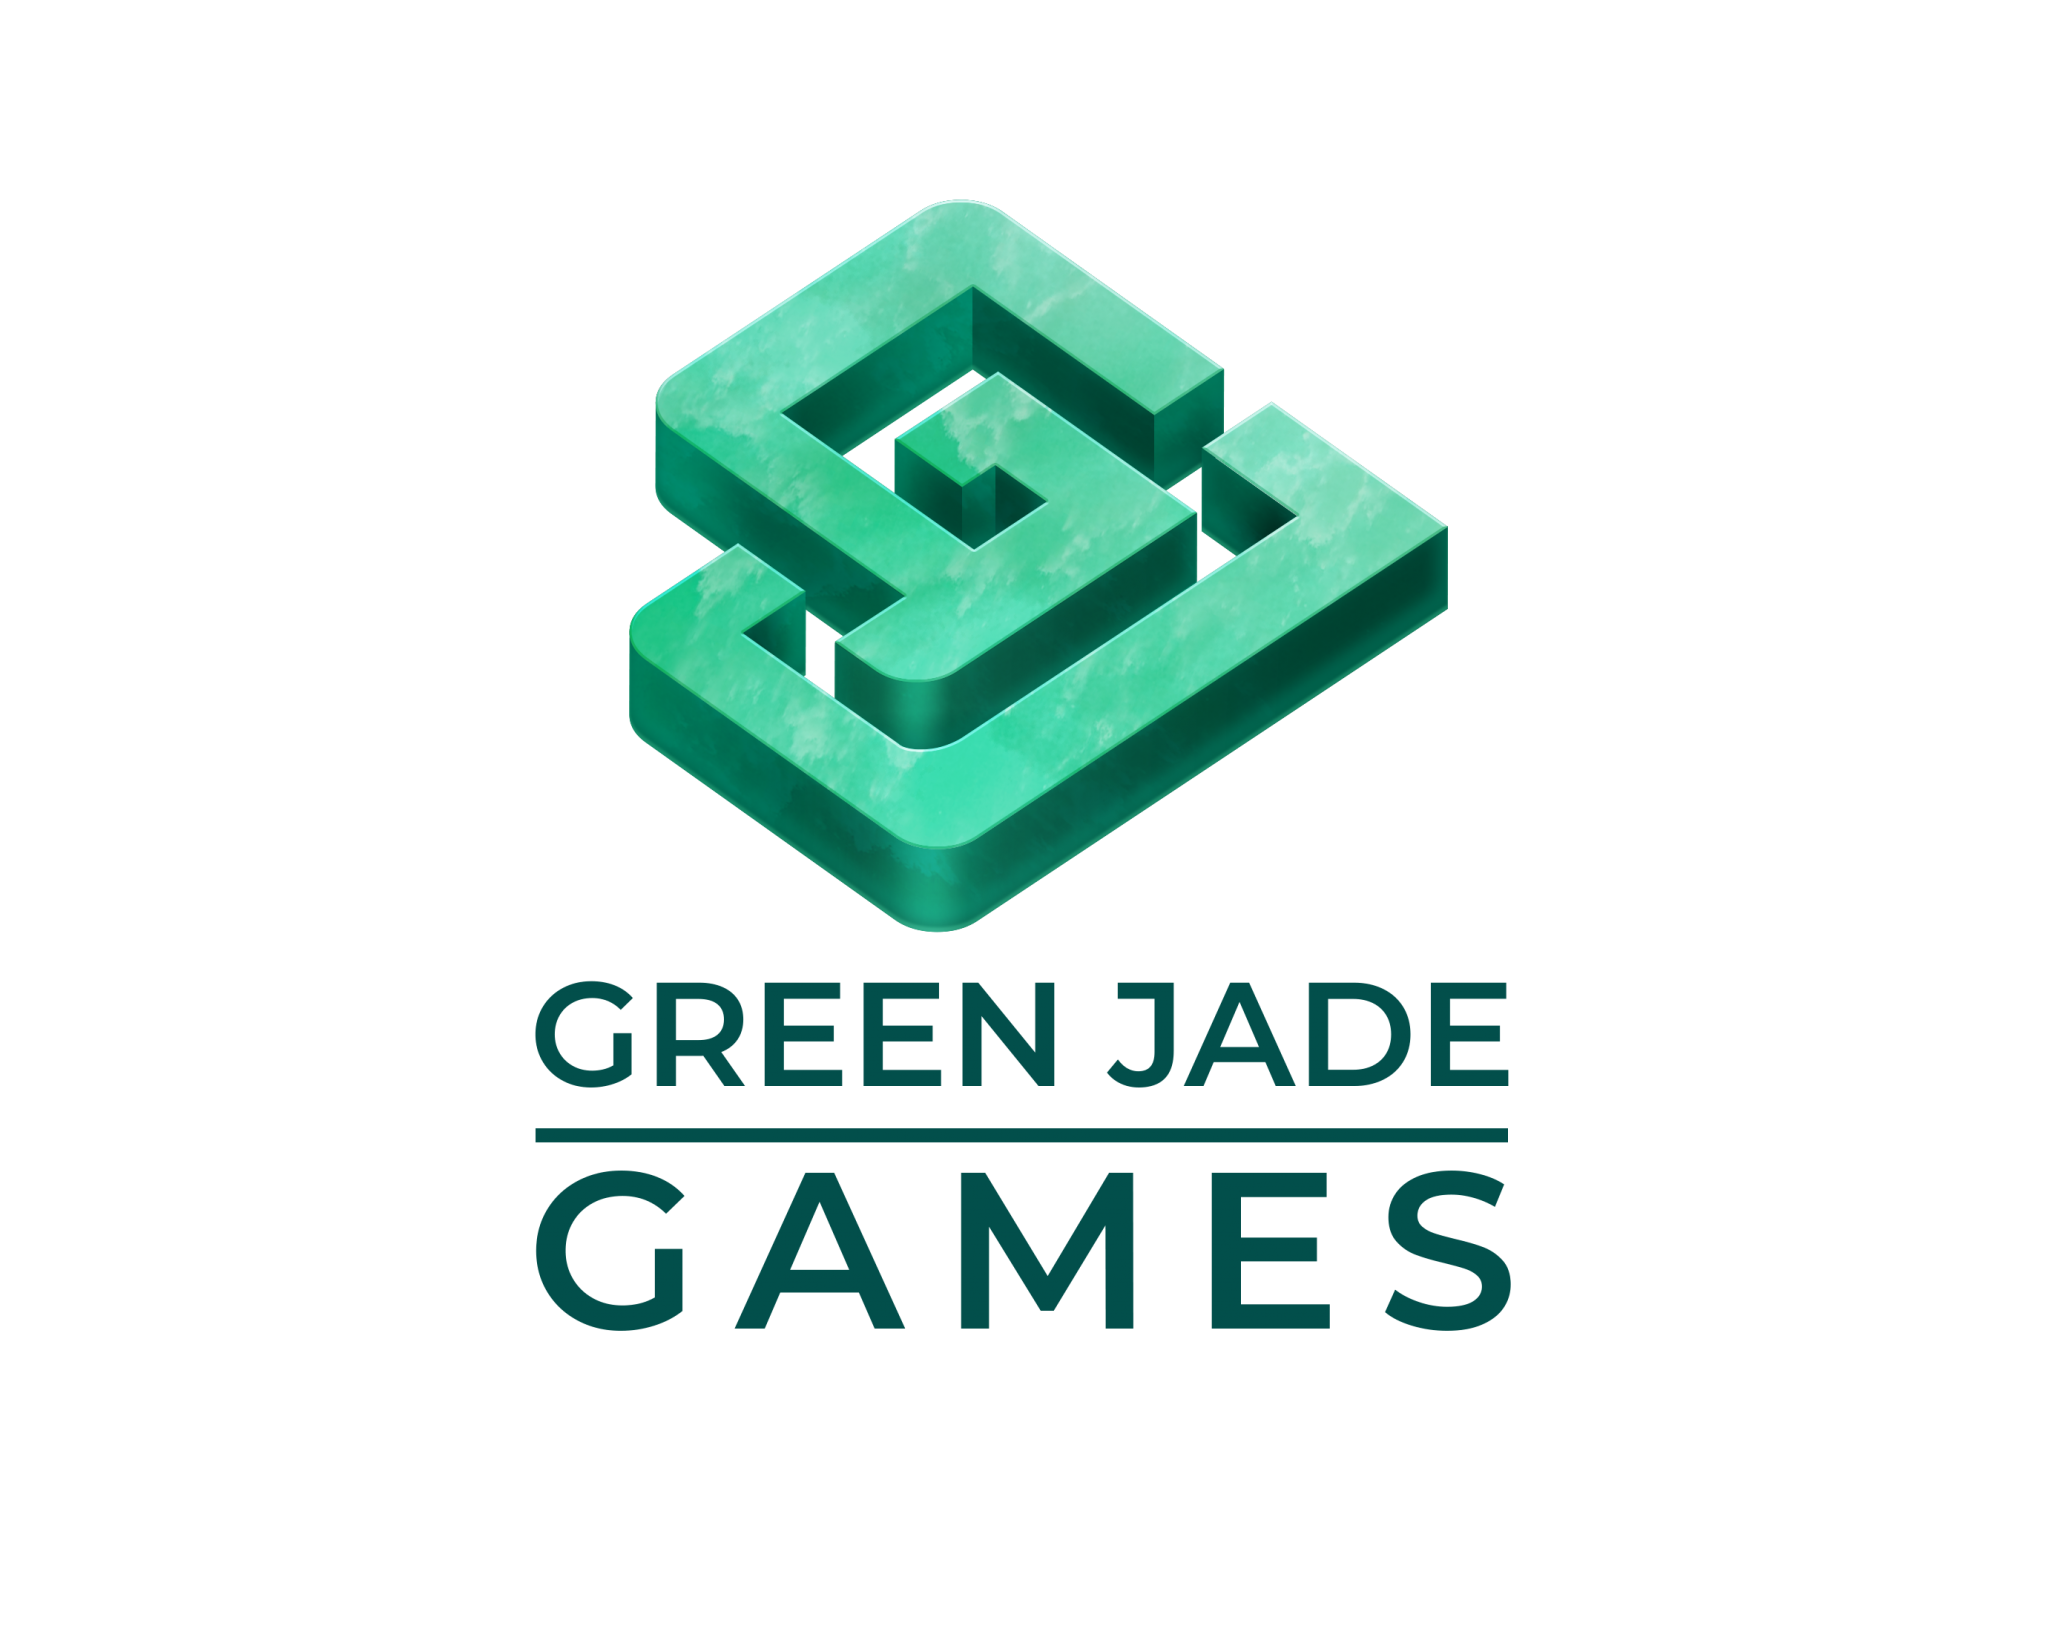 Featured Image Showcasing The Software Provider Green Jade Games